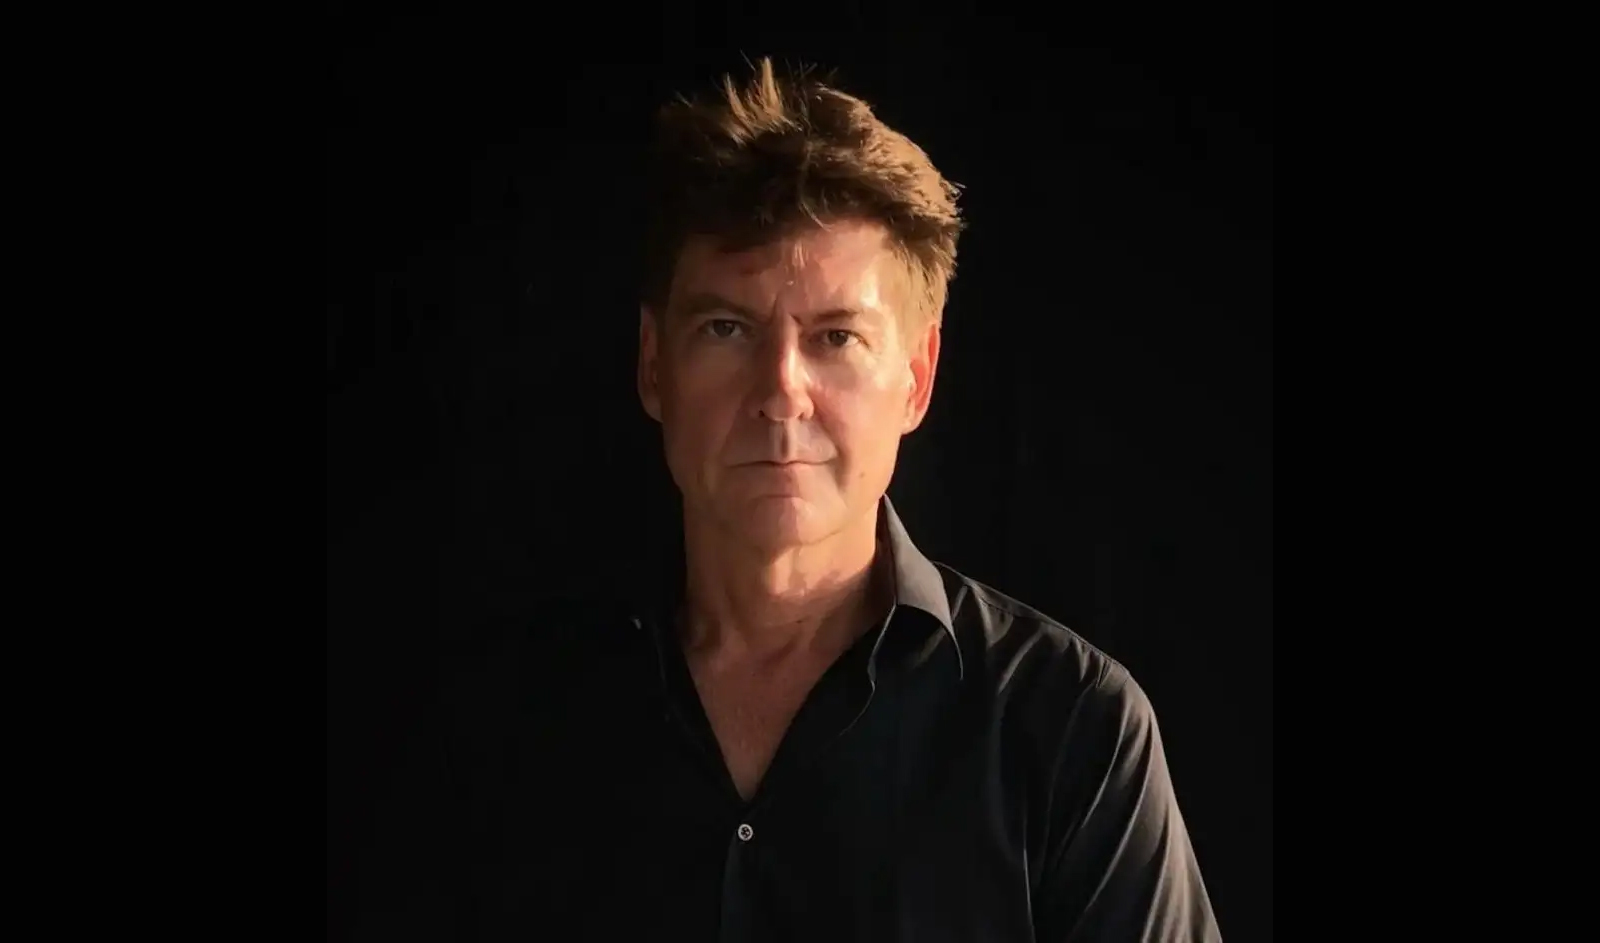 Portrait photo of a white man with brown hair, dressed in a black button-up shirt, against a black background.